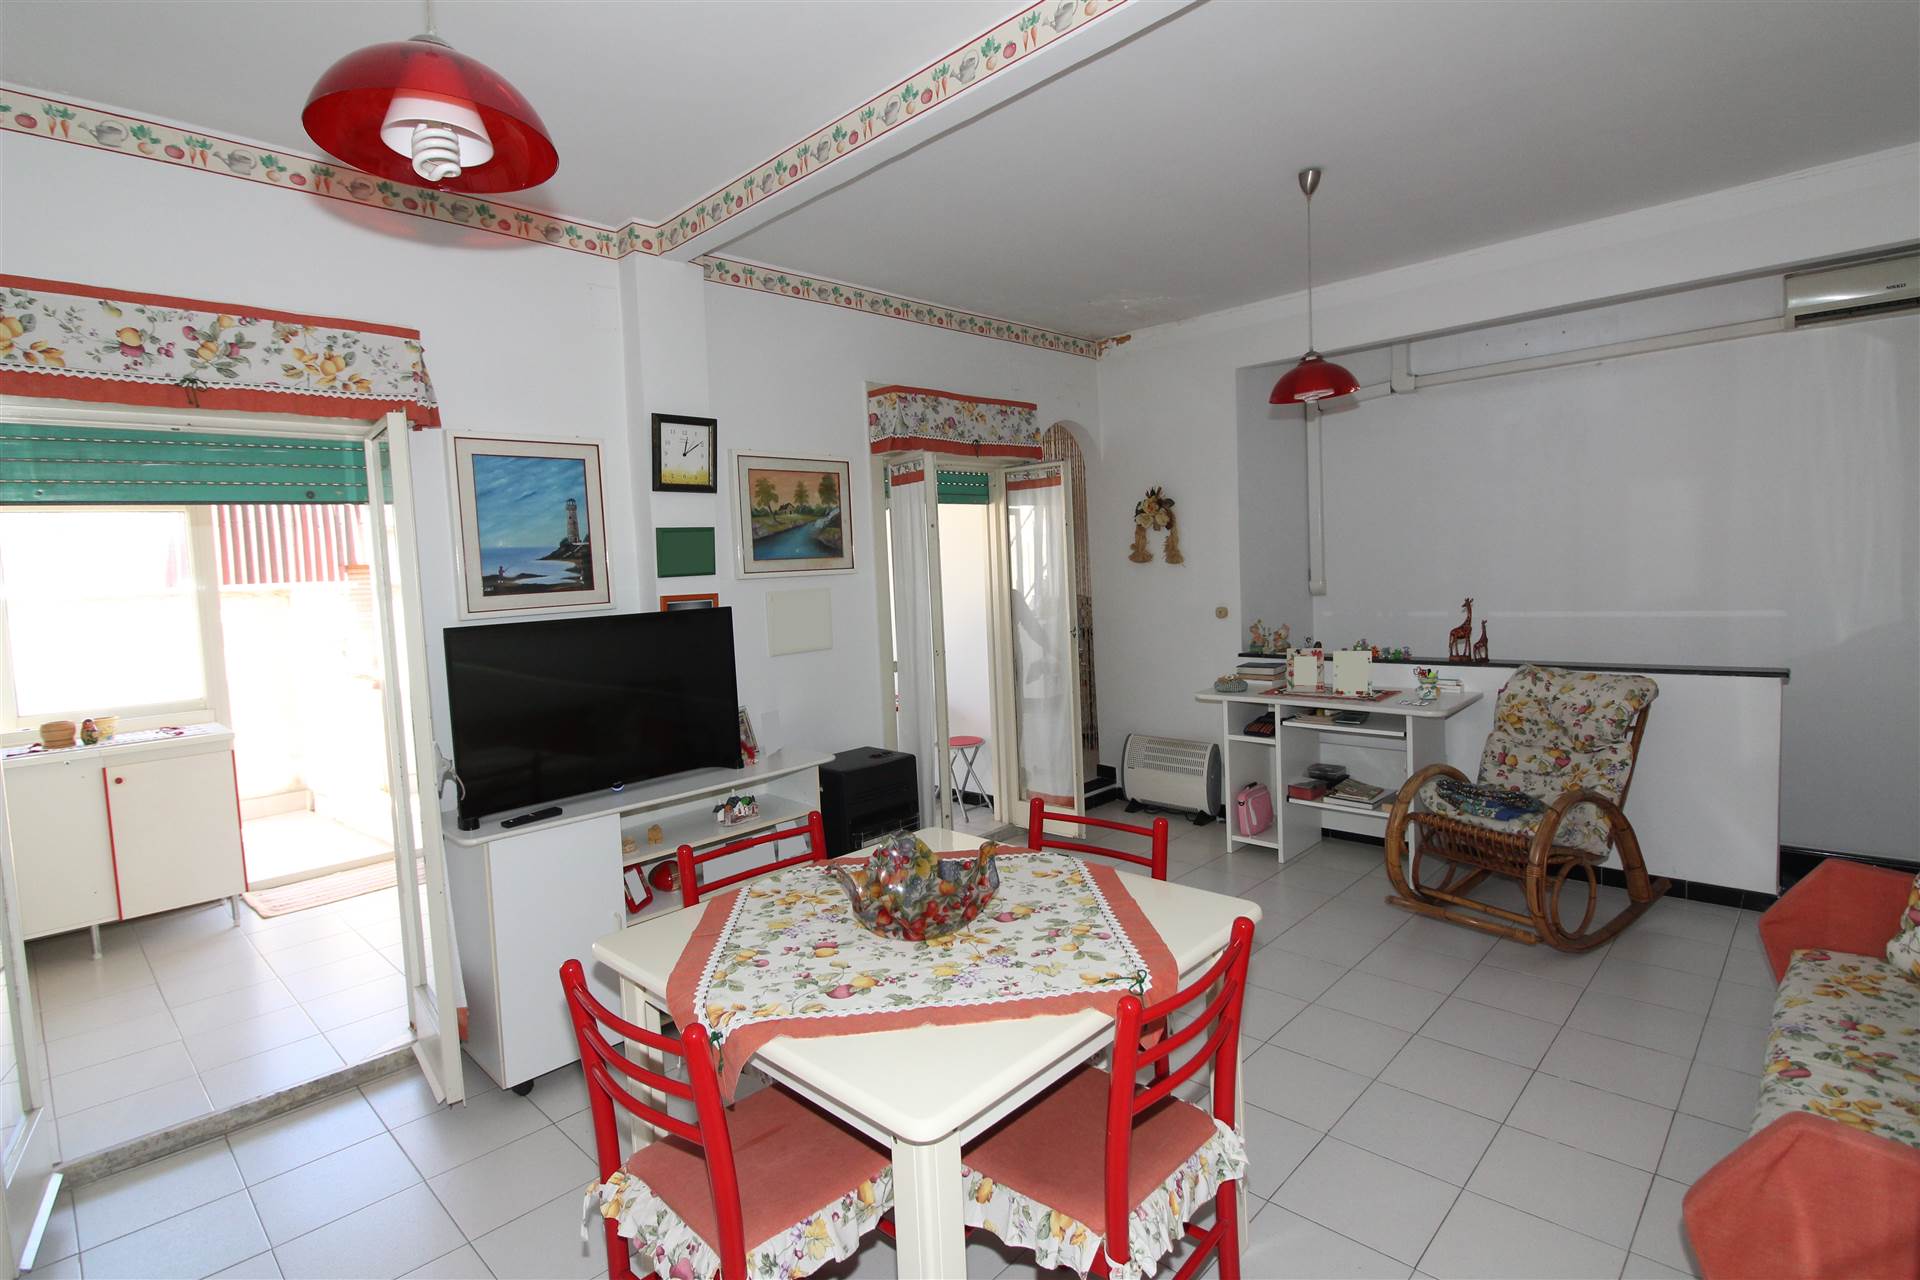 PISCINA COMUNALE, LENTINI, Semi detached house for sale of 125 Sq. mt., Good condition, placed at 1° on 3, composed by: 5 Rooms, Separate kitchen, , 